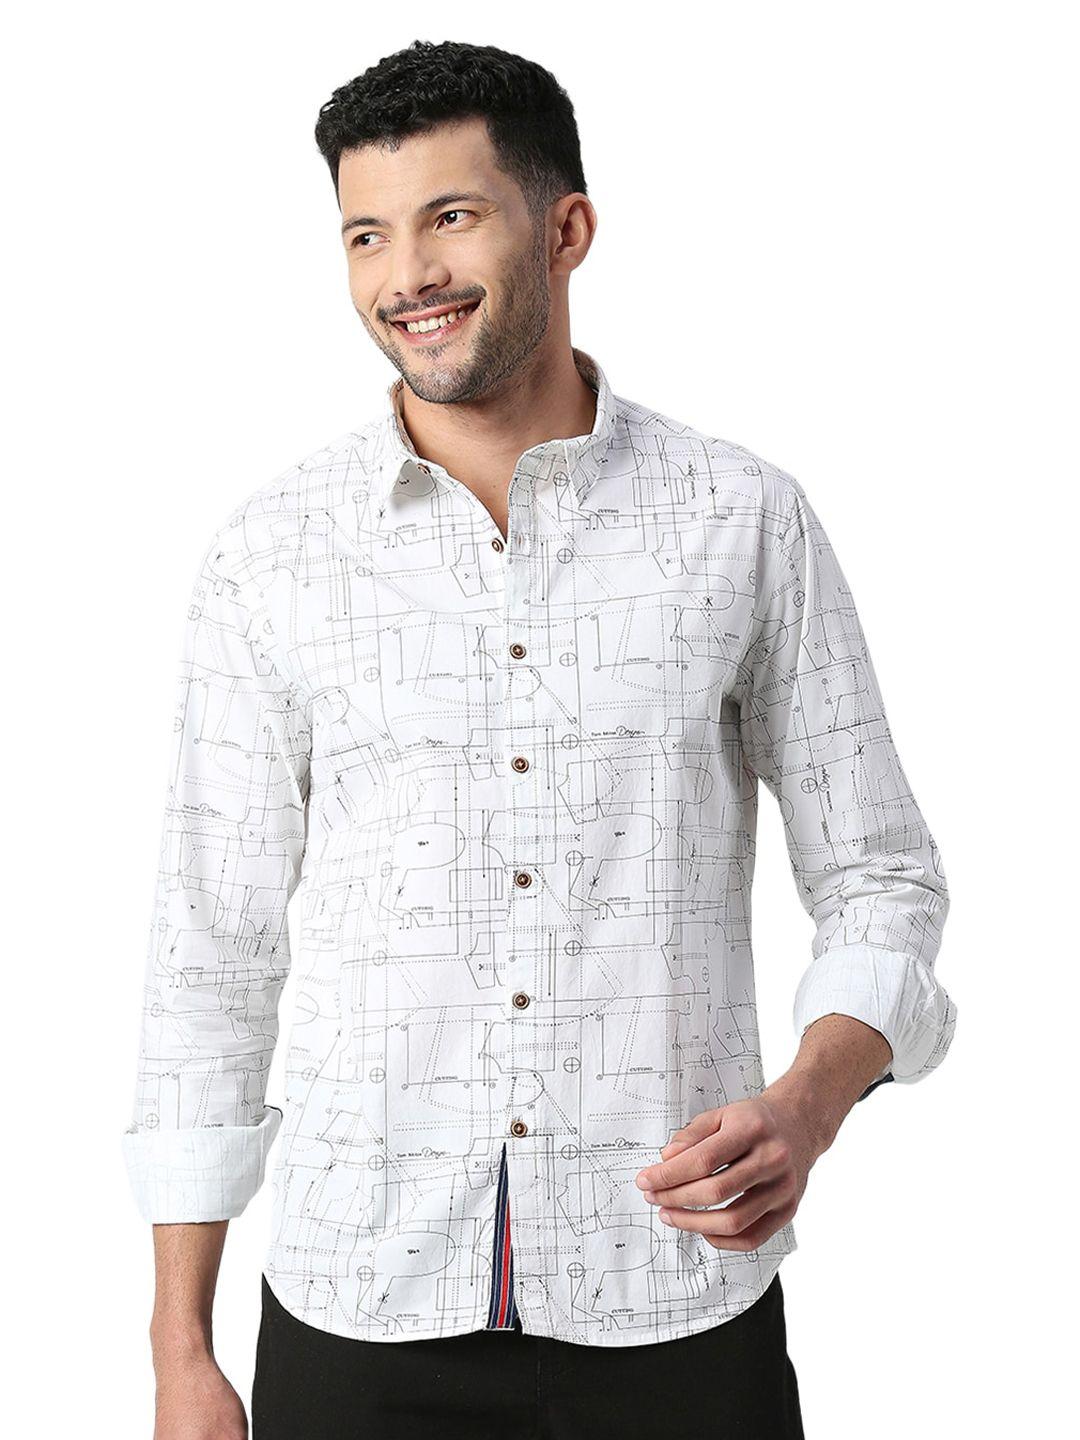 snx-geometric-printed-tailored-fit-opaque-cotton-casual-shirt